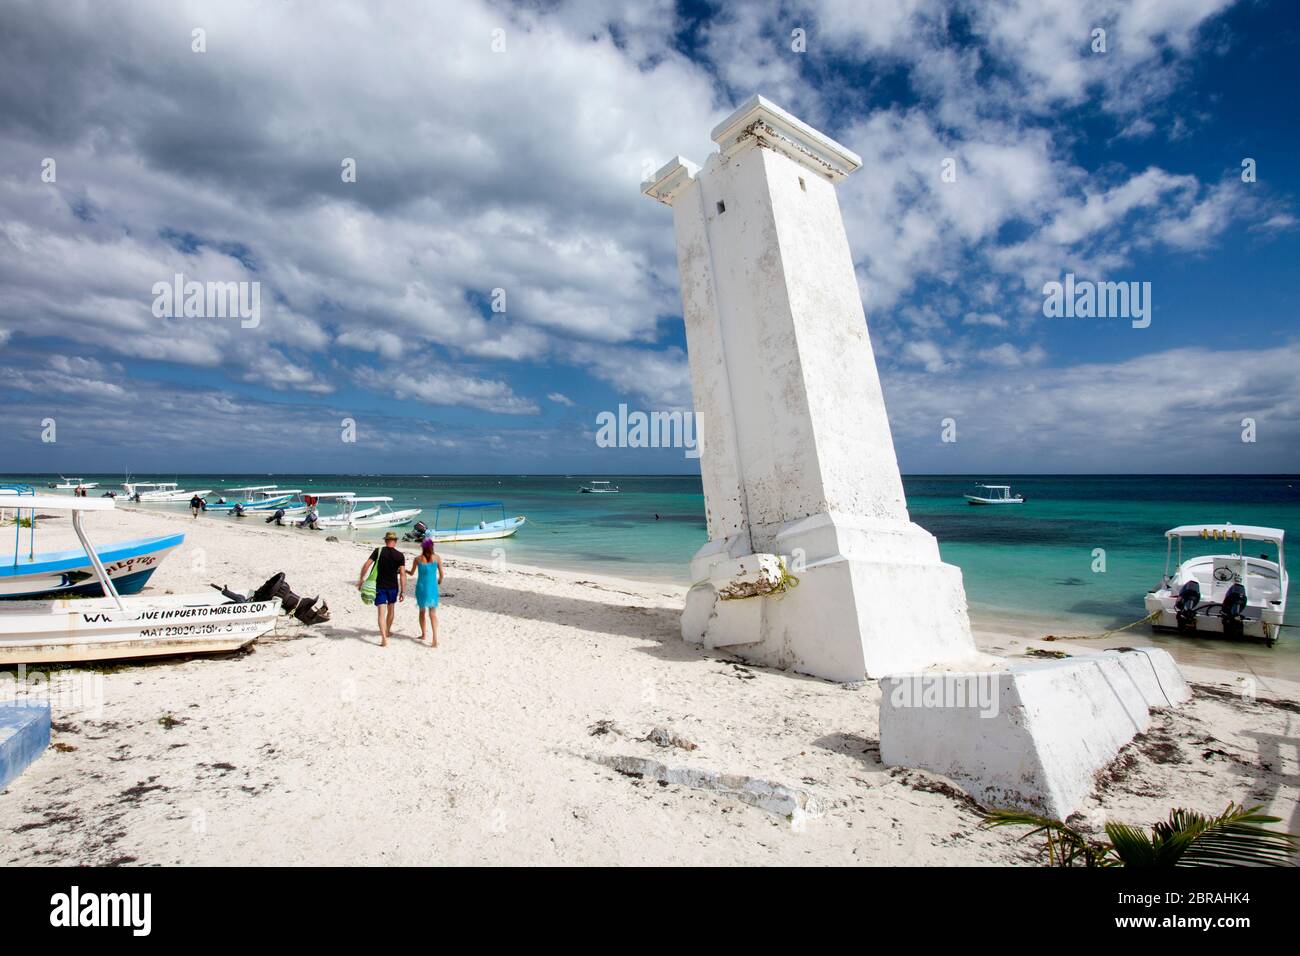 The leaning lighthouse in Puerto Morelos, Quintana Roo on the Mayan Riviera of Mexico. Stock Photo